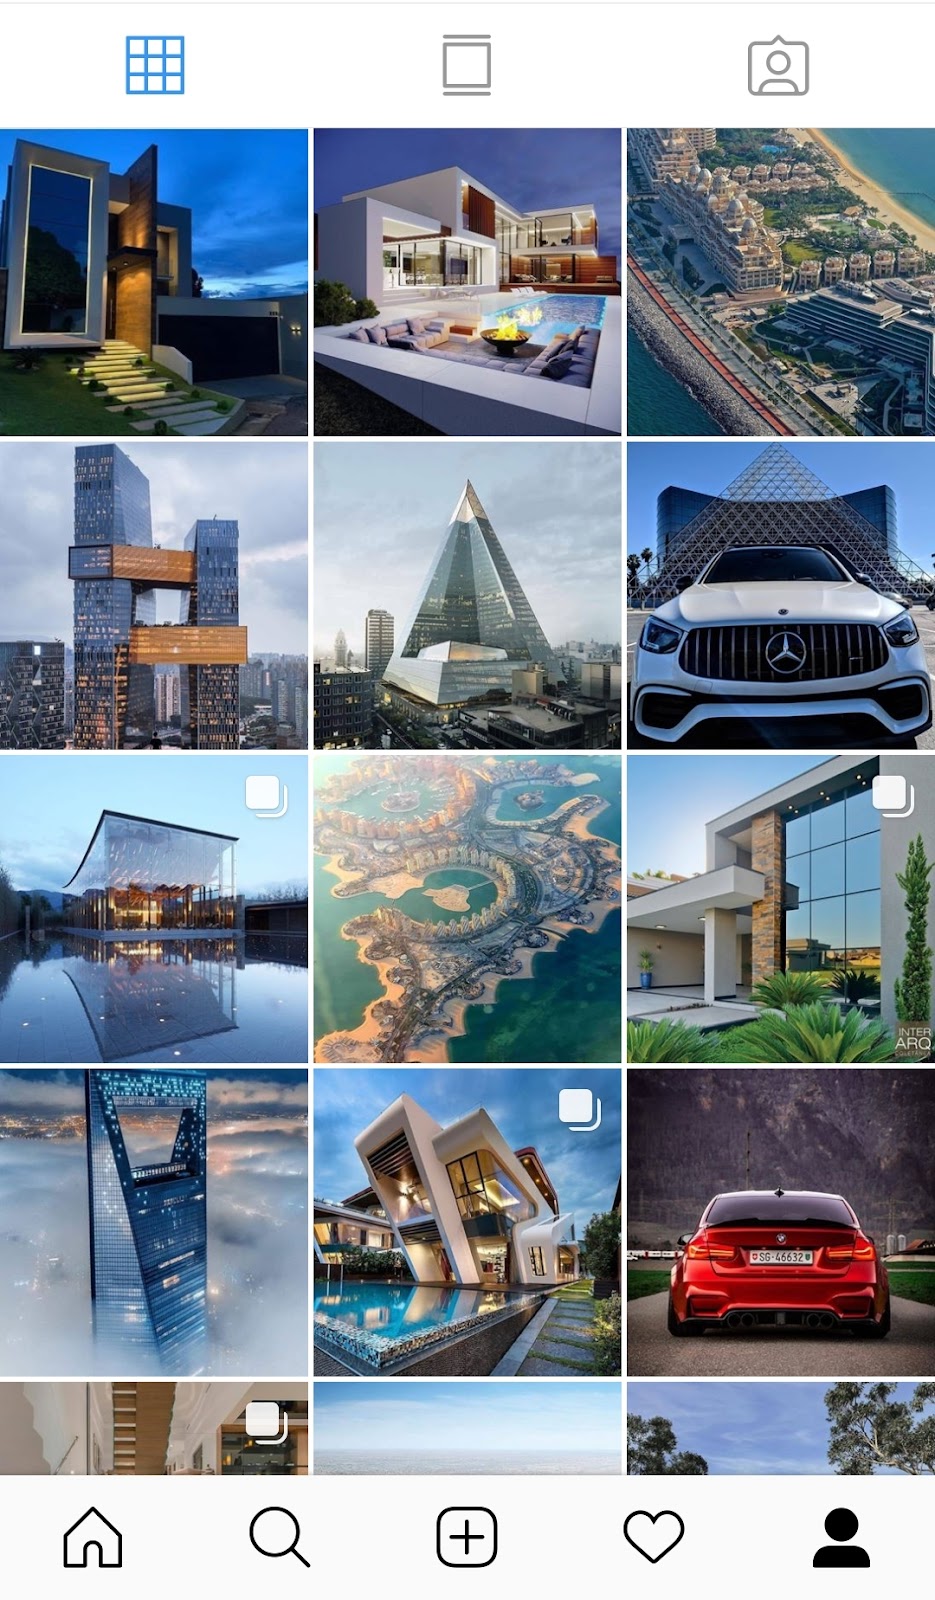 Product architect  Instagram account showing quality architectural images